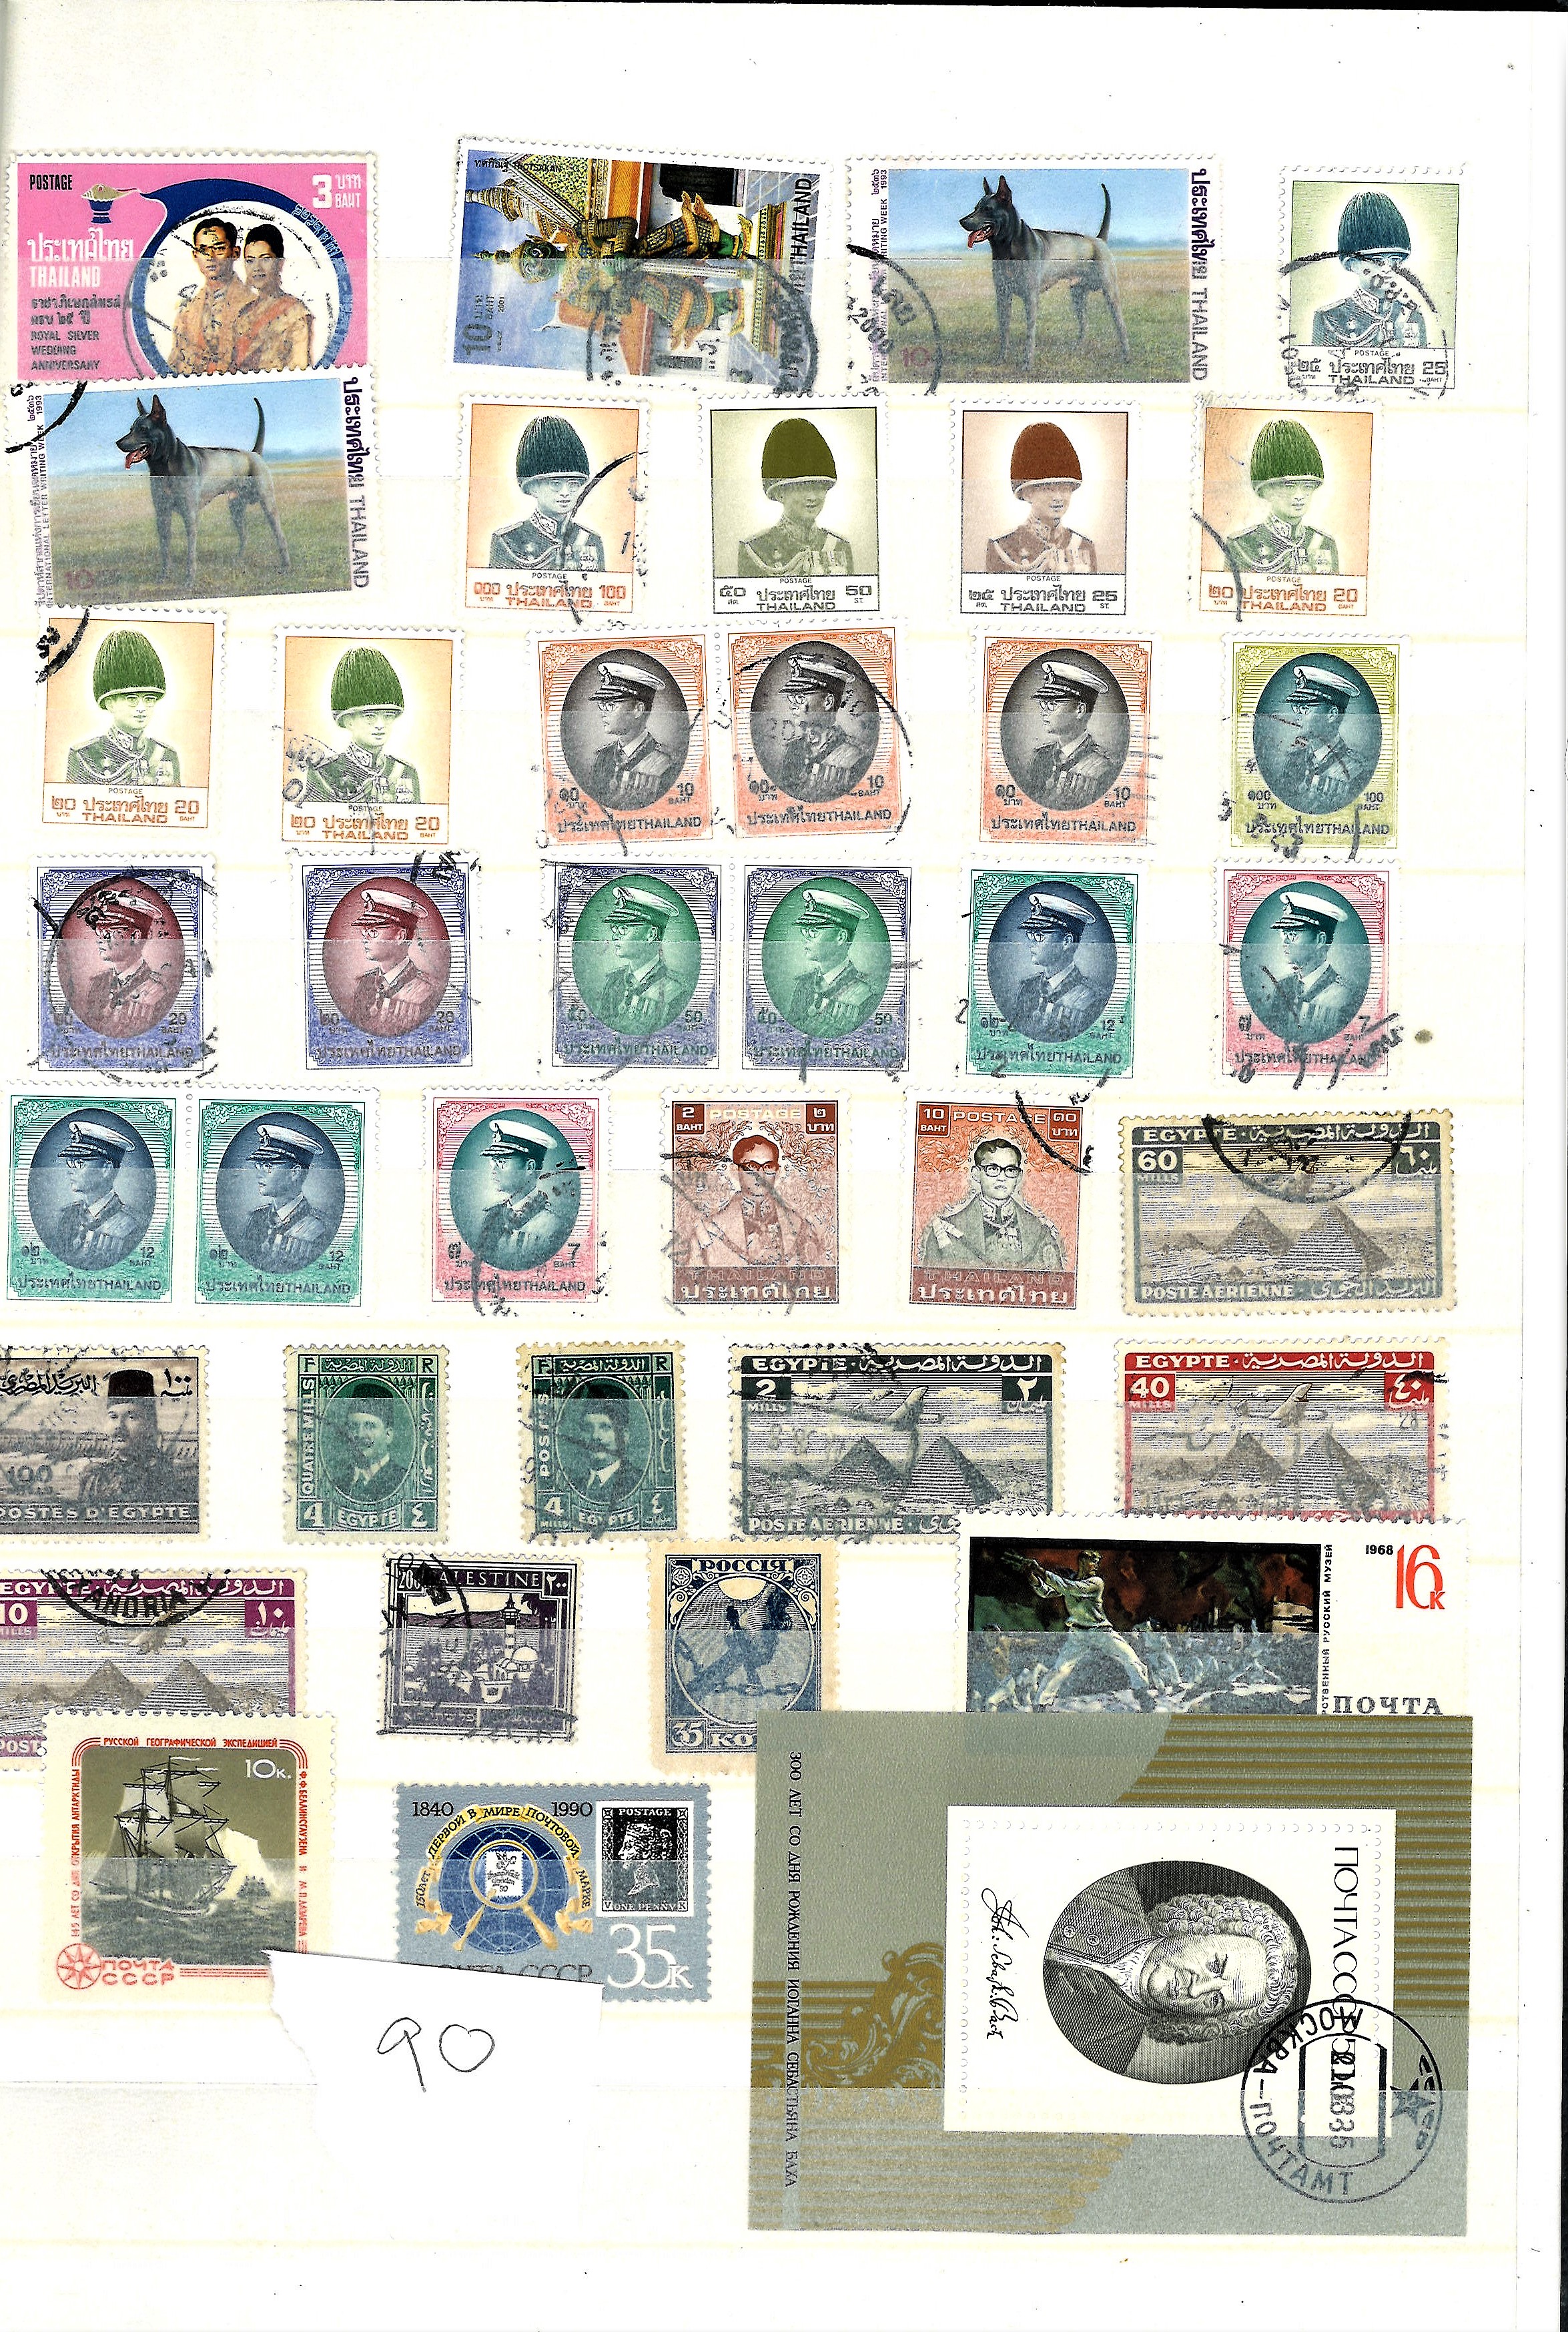 Worldwide high value stamp collection in black stock book countries include USA, Czechoslovakia,